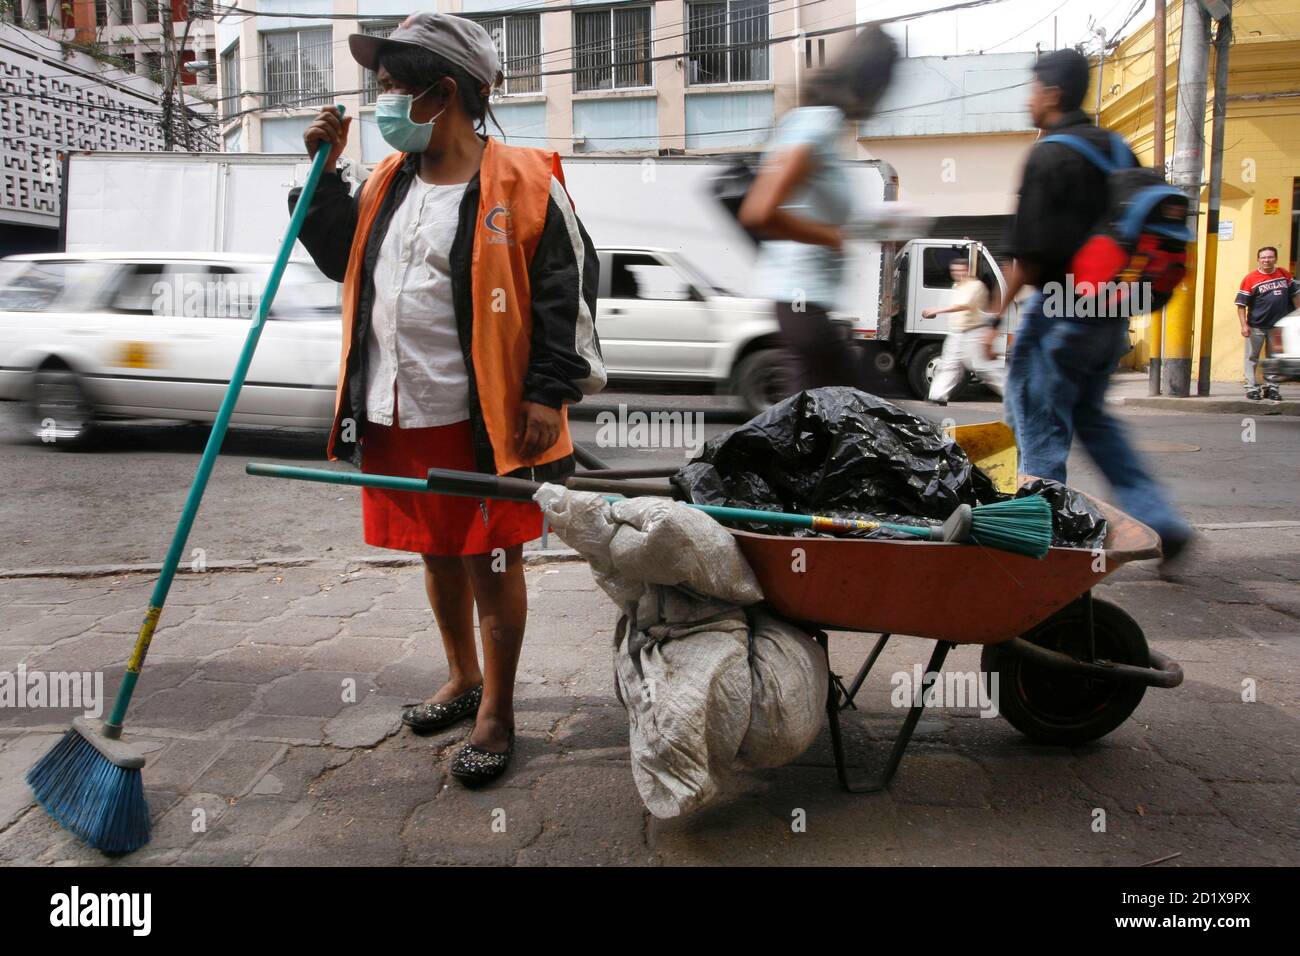 A municipal worker wears a mask to protect herself against the influenza A (H1N1), formerly referred to as swine flu, at downtown Tegucigalpa, April 30, 2009. The World Health Organisation (WHO), bowing to pressure from meat industry producers and concerned governments, said on Thursday it would refer to a deadly new virus strain as influenza A (H1N1), not swine flu.    REUTERS/Edgard Garrido  (HONDURAS HEALTH SOCIETY) Stock Photo